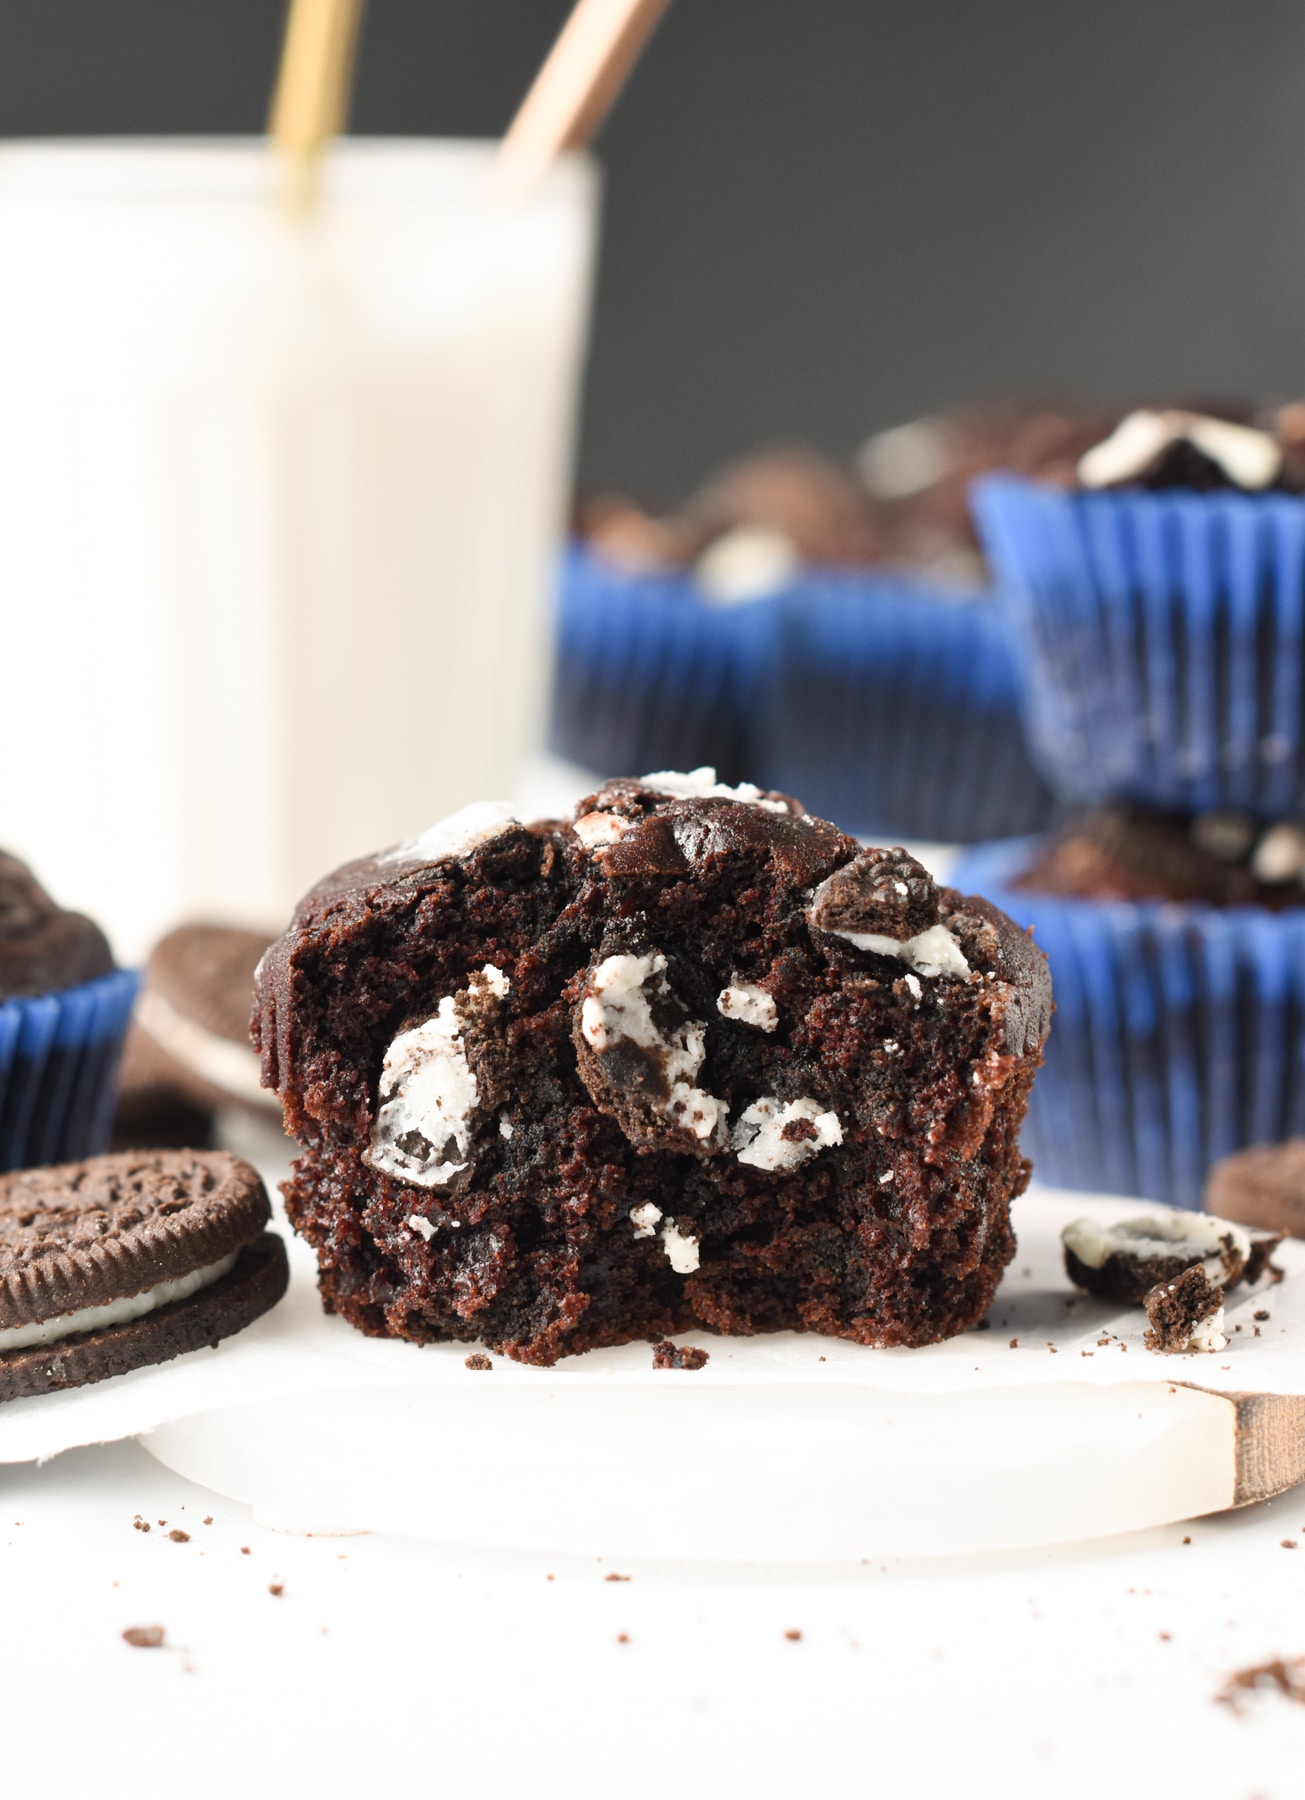 Oreo Muffins Vegan Egg Free Dairy Free Oreo Cupcakes for Party